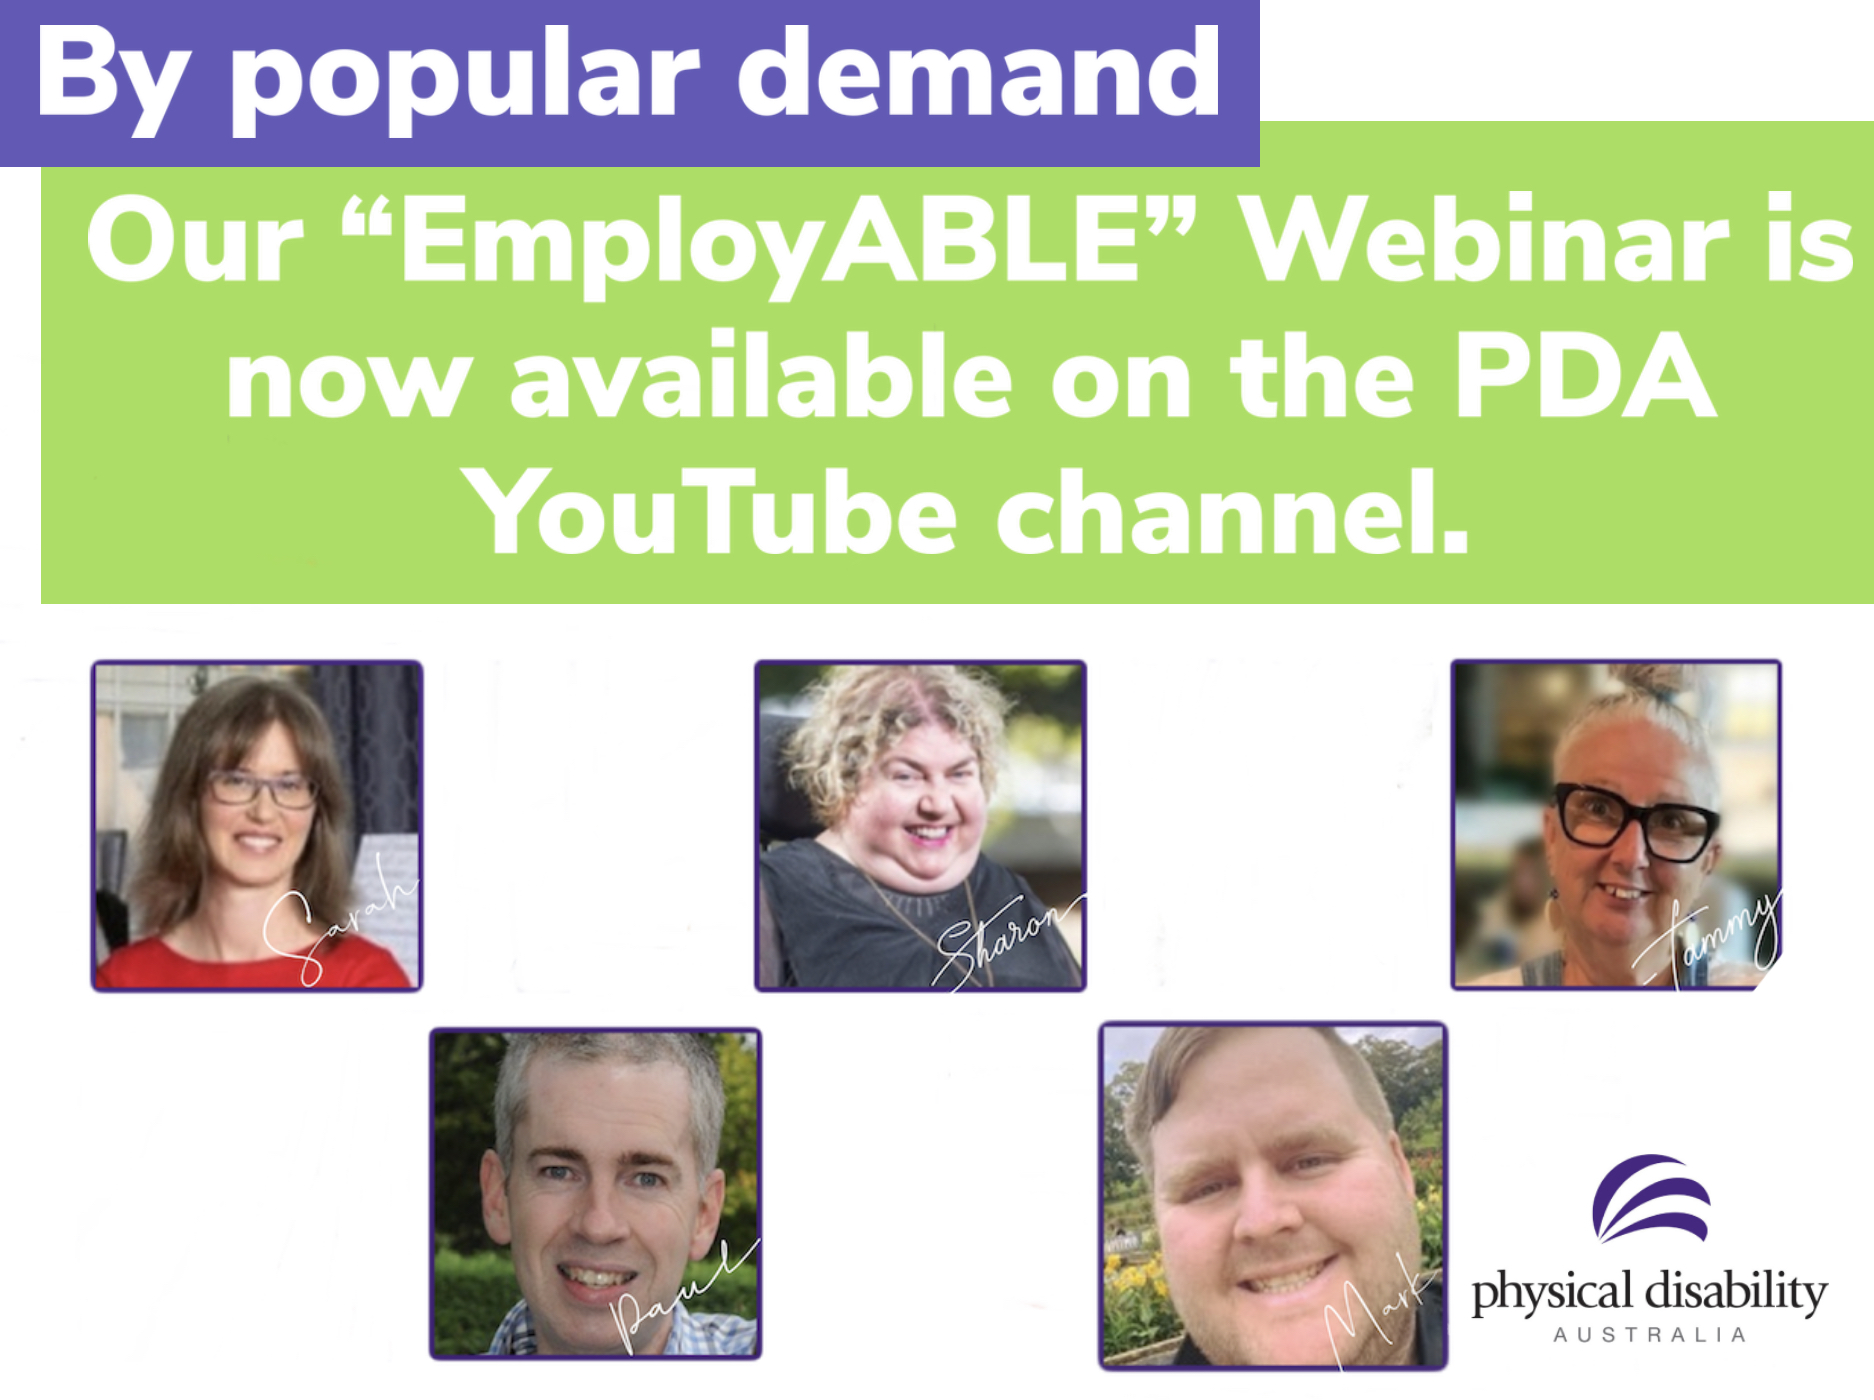 Our Popular ”EmployABLE” Webinar is now available on the PDA YouTube channel.